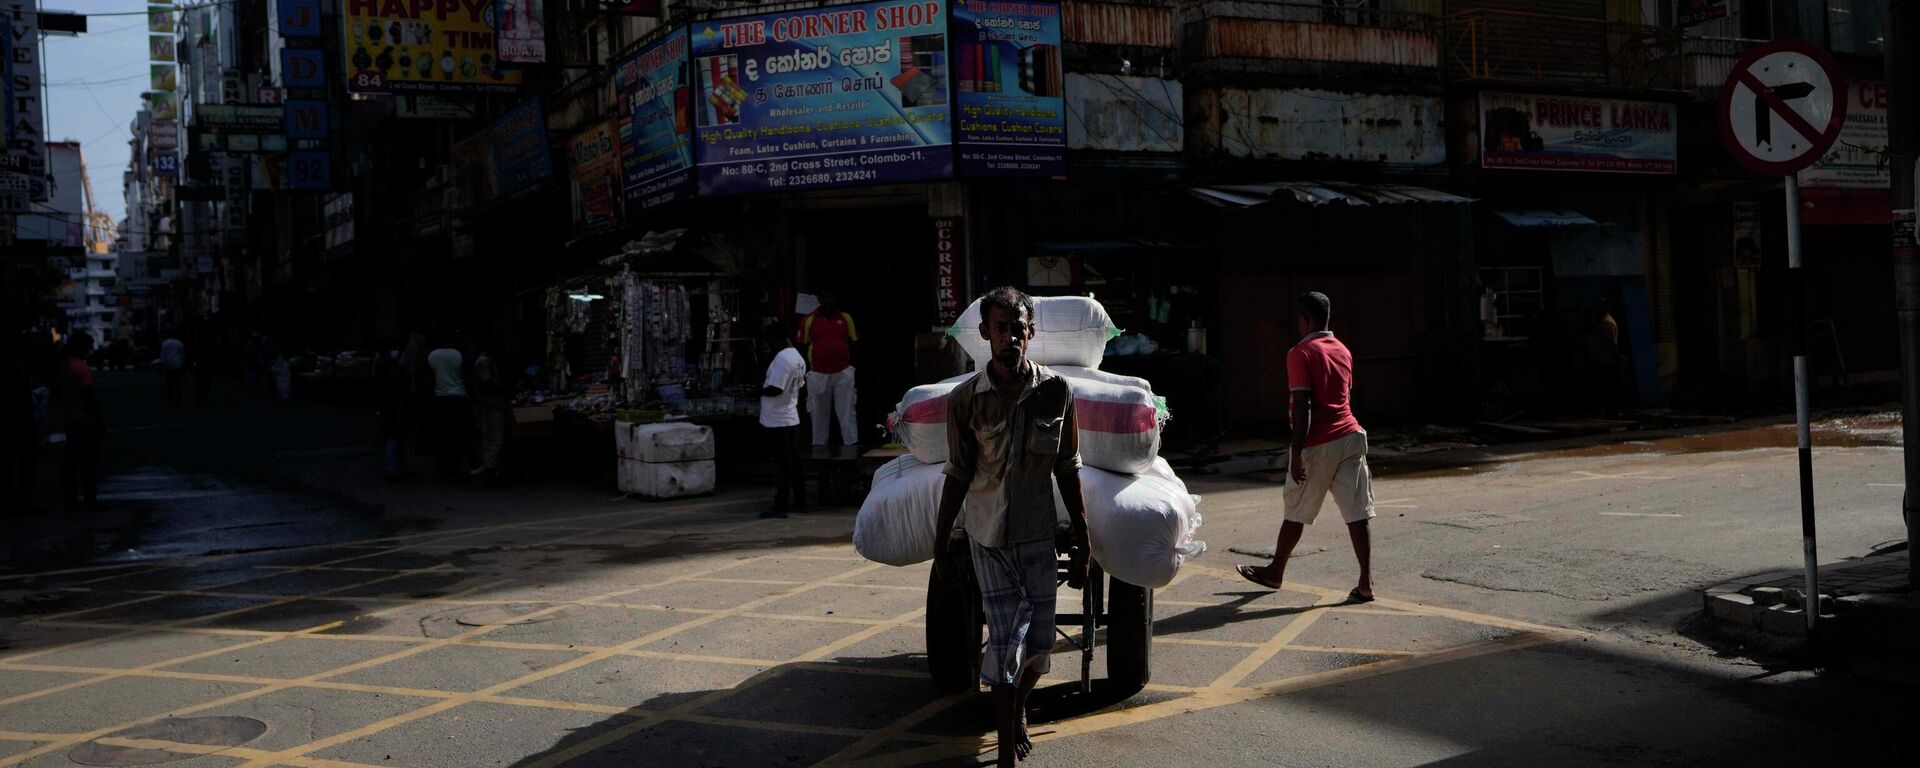 A laborer pulls a cart at a wholesale market in Colombo, Sri Lanka, Sunday, June 26, 2022. Sri Lankans have endured months of shortages of food, fuel and other necessities due to the country's dwindling foreign exchange reserves and mounting debt, worsened by the pandemic and other longer term troubles. - Sputnik International, 1920, 01.07.2022